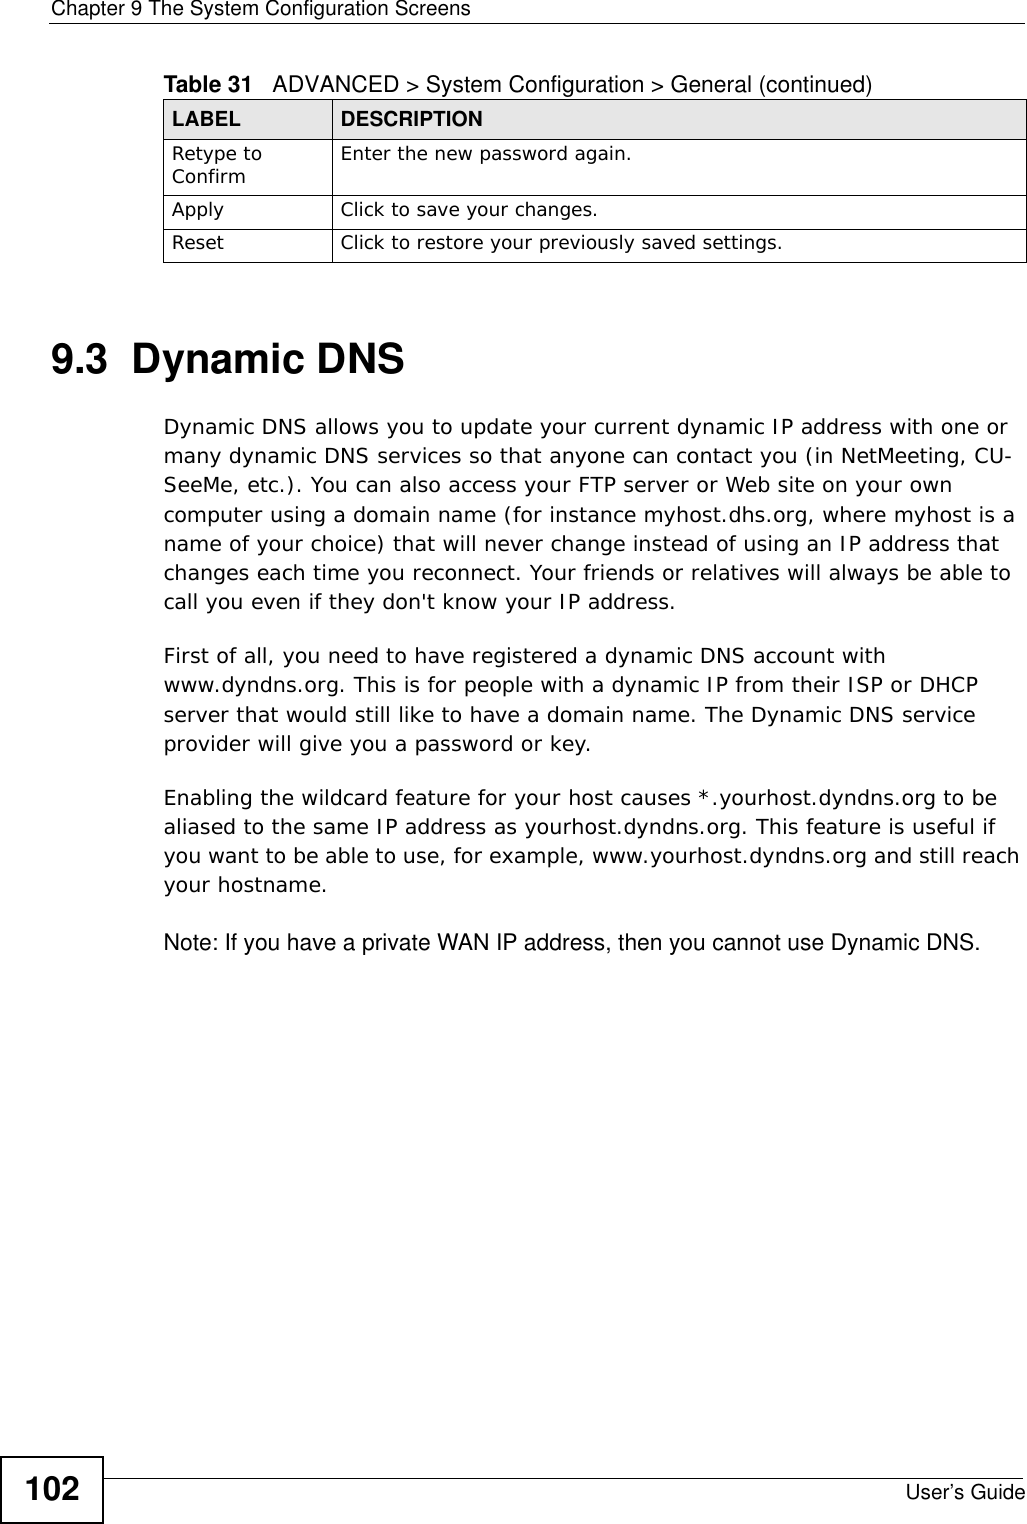 Chapter 9 The System Configuration ScreensUser’s Guide1029.3  Dynamic DNSDynamic DNS allows you to update your current dynamic IP address with one or many dynamic DNS services so that anyone can contact you (in NetMeeting, CU-SeeMe, etc.). You can also access your FTP server or Web site on your own computer using a domain name (for instance myhost.dhs.org, where myhost is a name of your choice) that will never change instead of using an IP address that changes each time you reconnect. Your friends or relatives will always be able to call you even if they don&apos;t know your IP address.First of all, you need to have registered a dynamic DNS account with www.dyndns.org. This is for people with a dynamic IP from their ISP or DHCP server that would still like to have a domain name. The Dynamic DNS service provider will give you a password or key.Enabling the wildcard feature for your host causes *.yourhost.dyndns.org to be aliased to the same IP address as yourhost.dyndns.org. This feature is useful if you want to be able to use, for example, www.yourhost.dyndns.org and still reach your hostname.Note: If you have a private WAN IP address, then you cannot use Dynamic DNS.Retype to Confirm Enter the new password again.Apply Click to save your changes.Reset Click to restore your previously saved settings.Table 31   ADVANCED &gt; System Configuration &gt; General (continued)LABEL DESCRIPTION